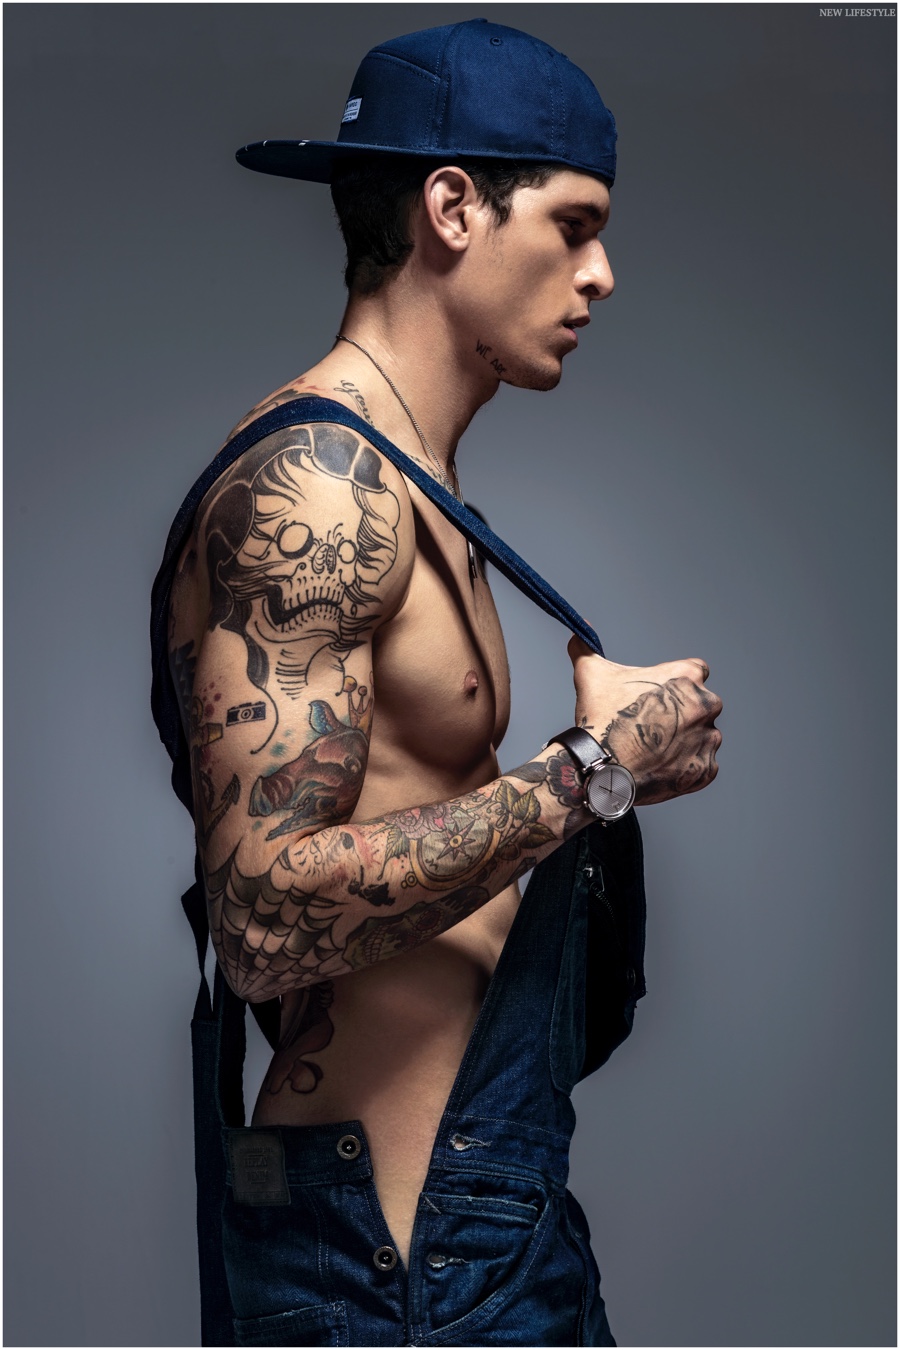 Diego Fragoso Shows Off Tattoos in New Lifestyle Summer 2015 Cover Shoot.